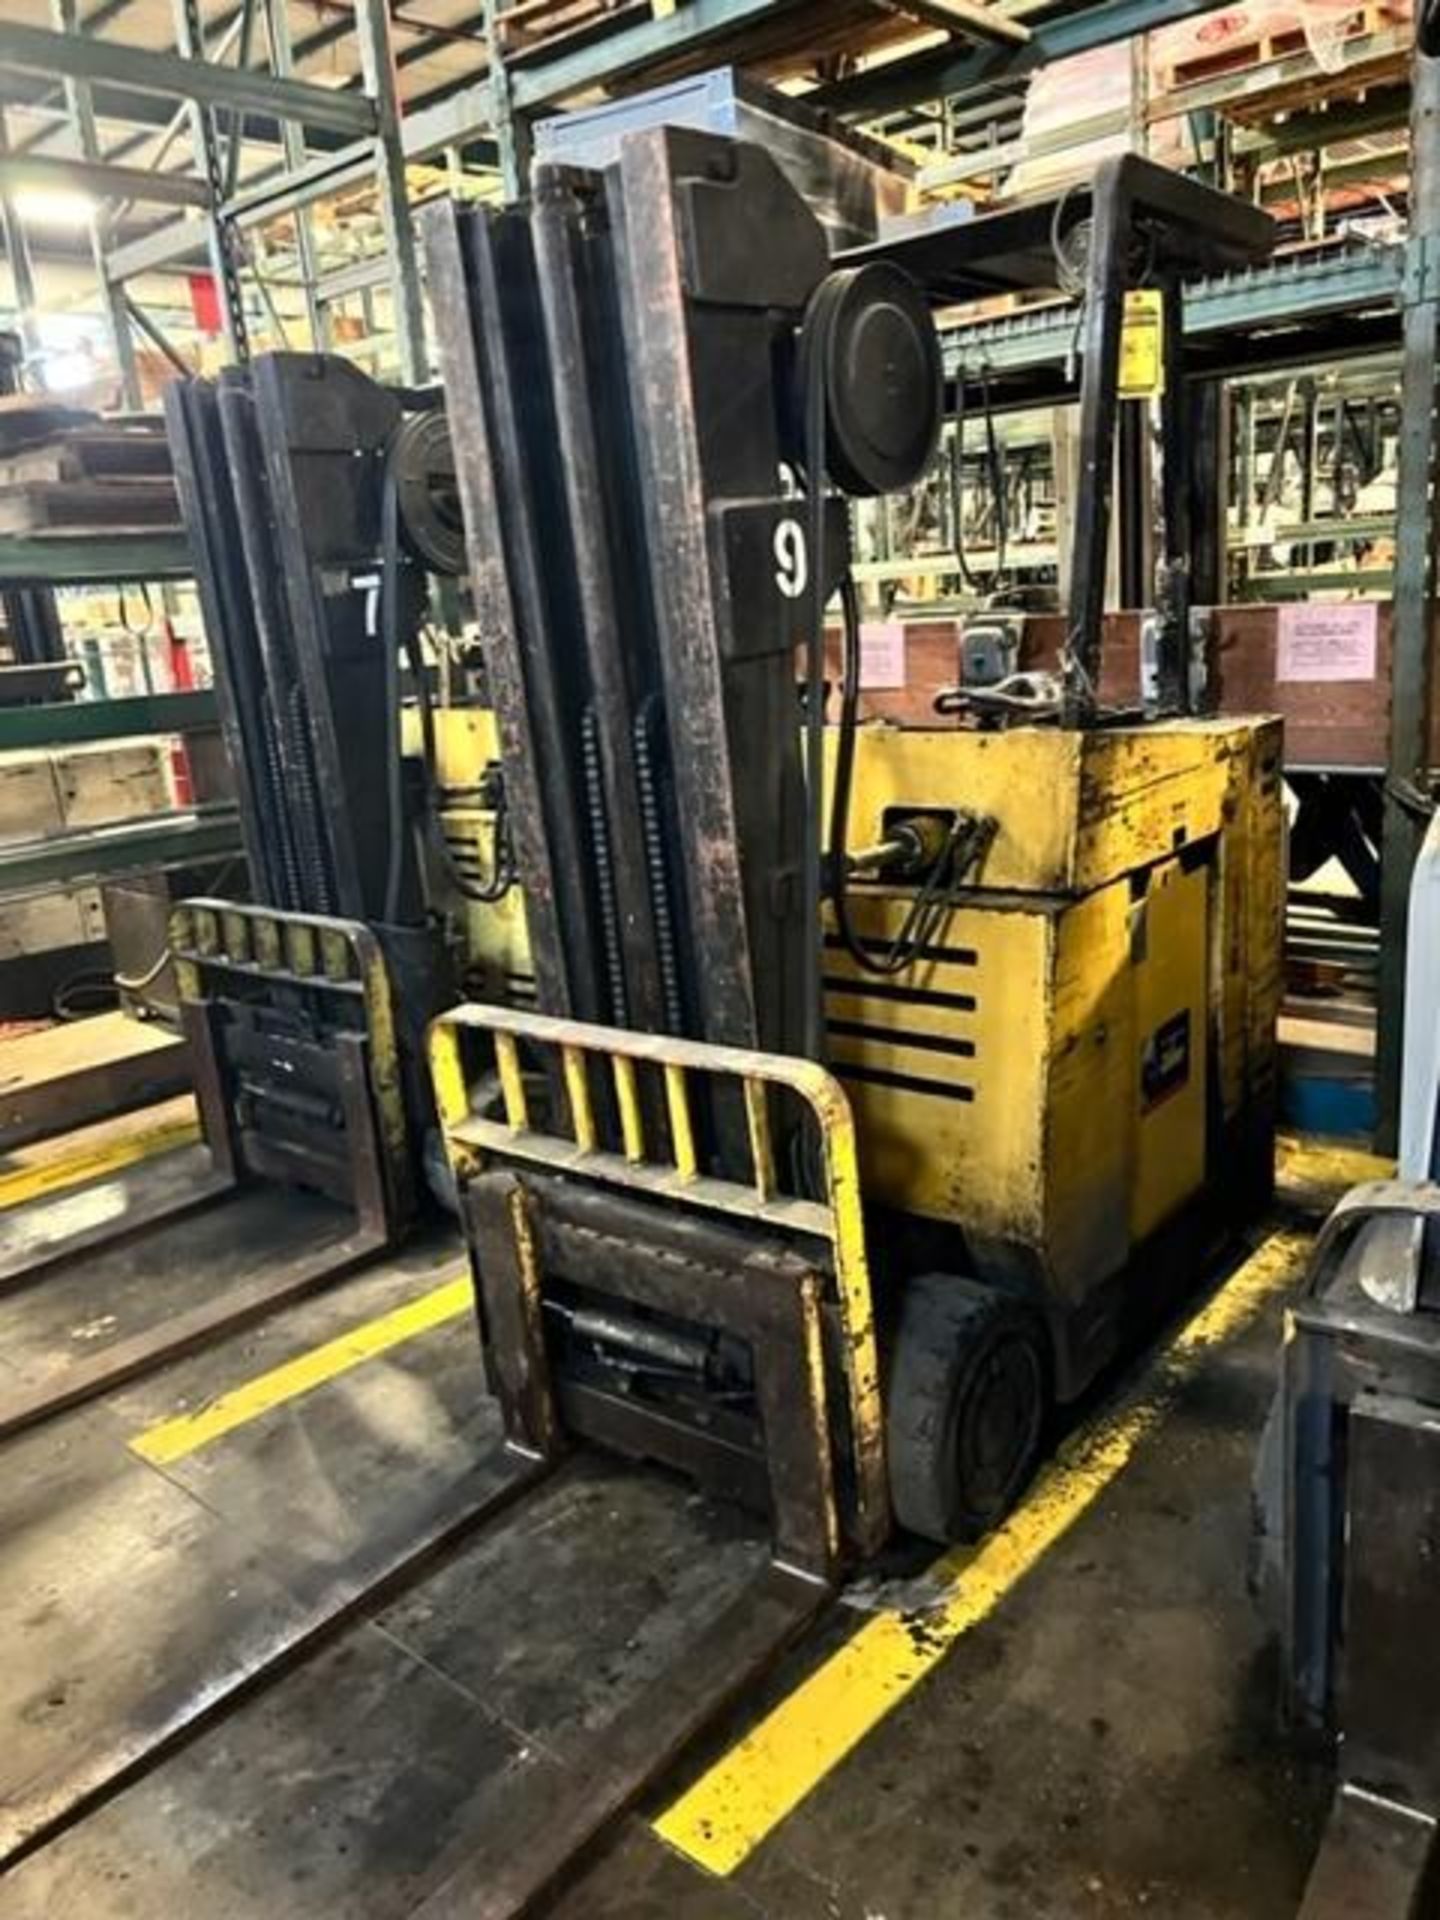 Raymond Electric Stand-Up Forklift, Model 060-C30TT, S/N 060-87-03745, 3,000 LB. Cap. 8,873 Hours, 1